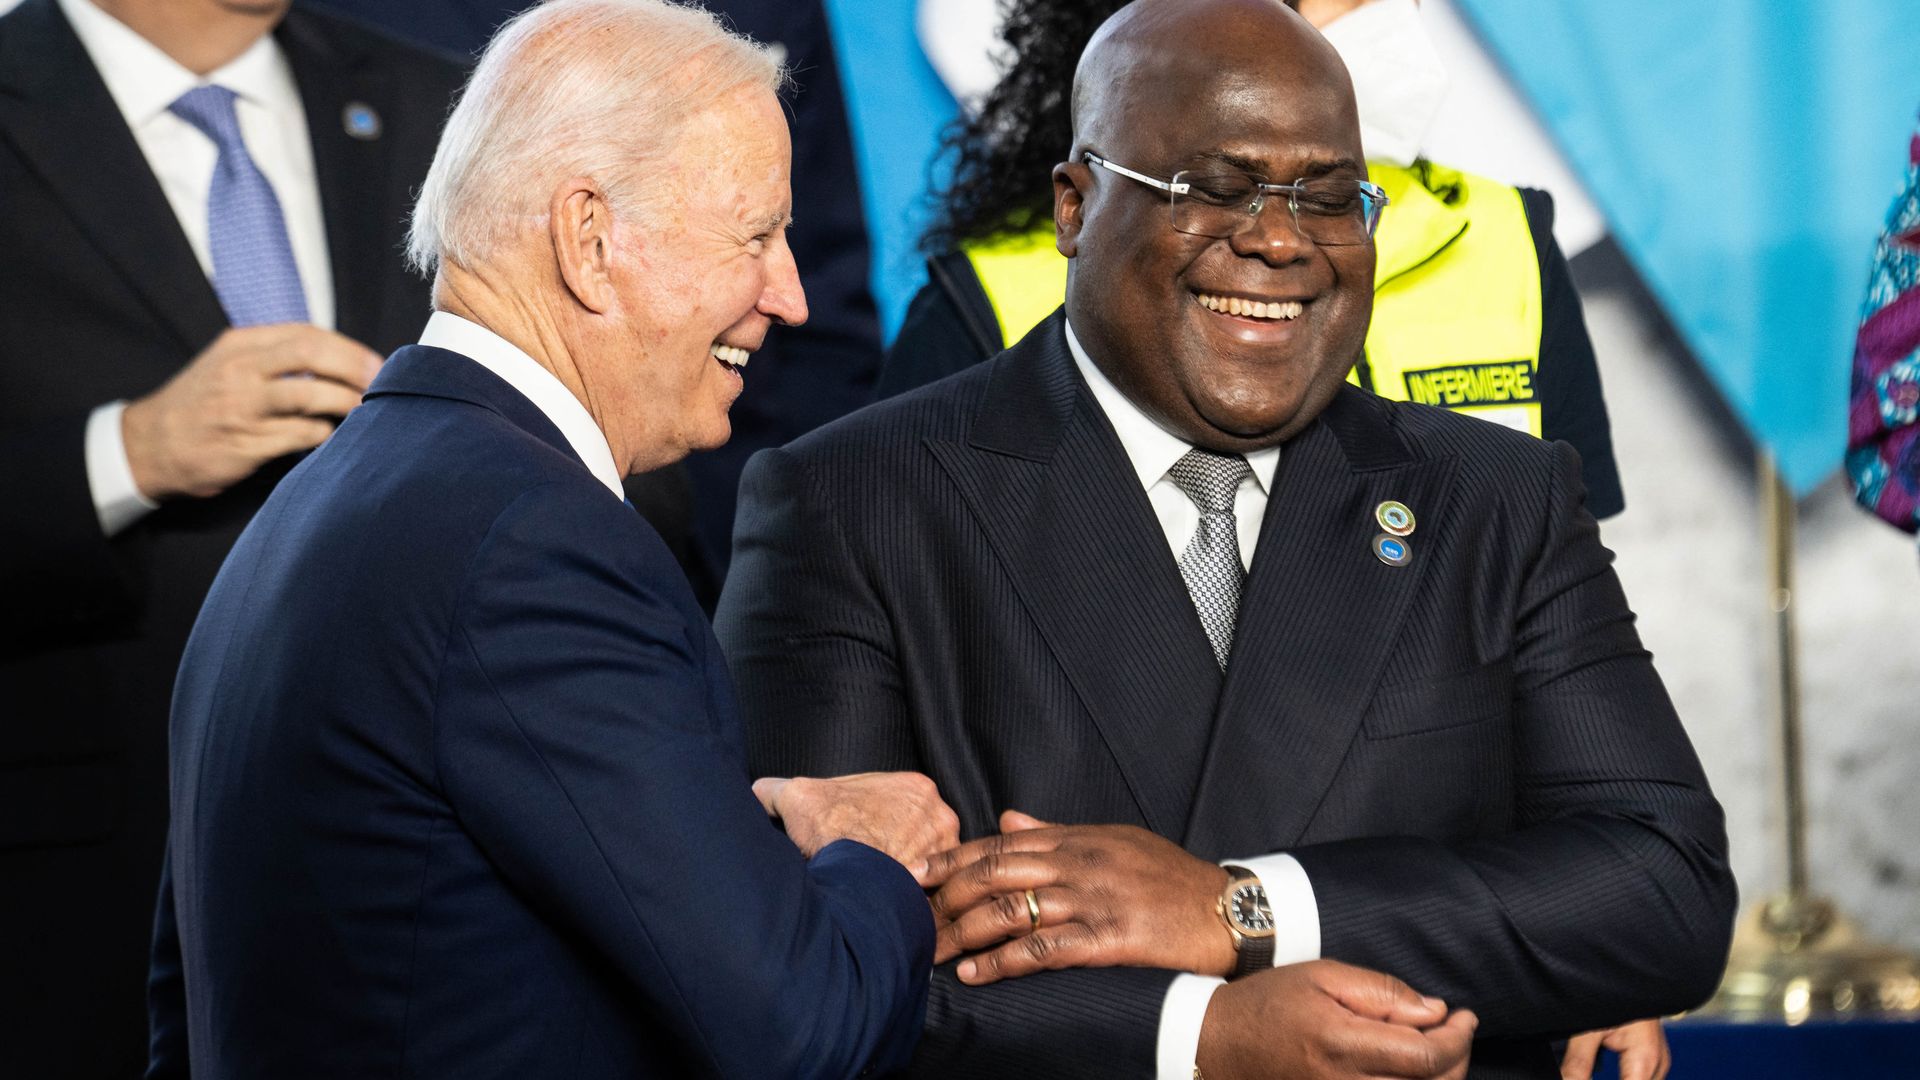 resident Joe Biden (L) and DR Congo President Felix Tshisekedi joke during a group photo at the G20 of World Leaders Summit on October 30, 2021